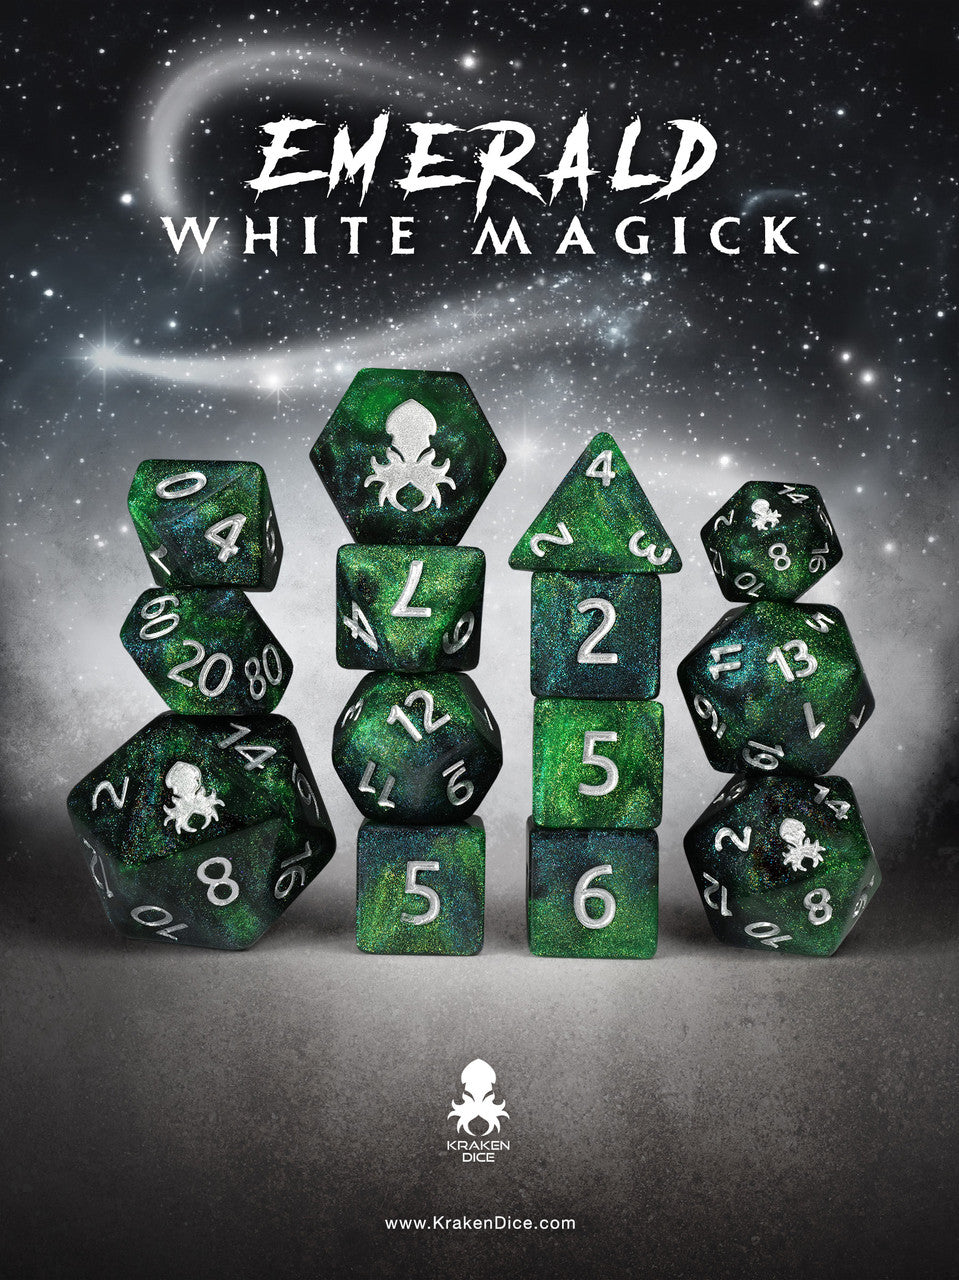 Emerald White Magick 14pc Dice Set inked in Silver